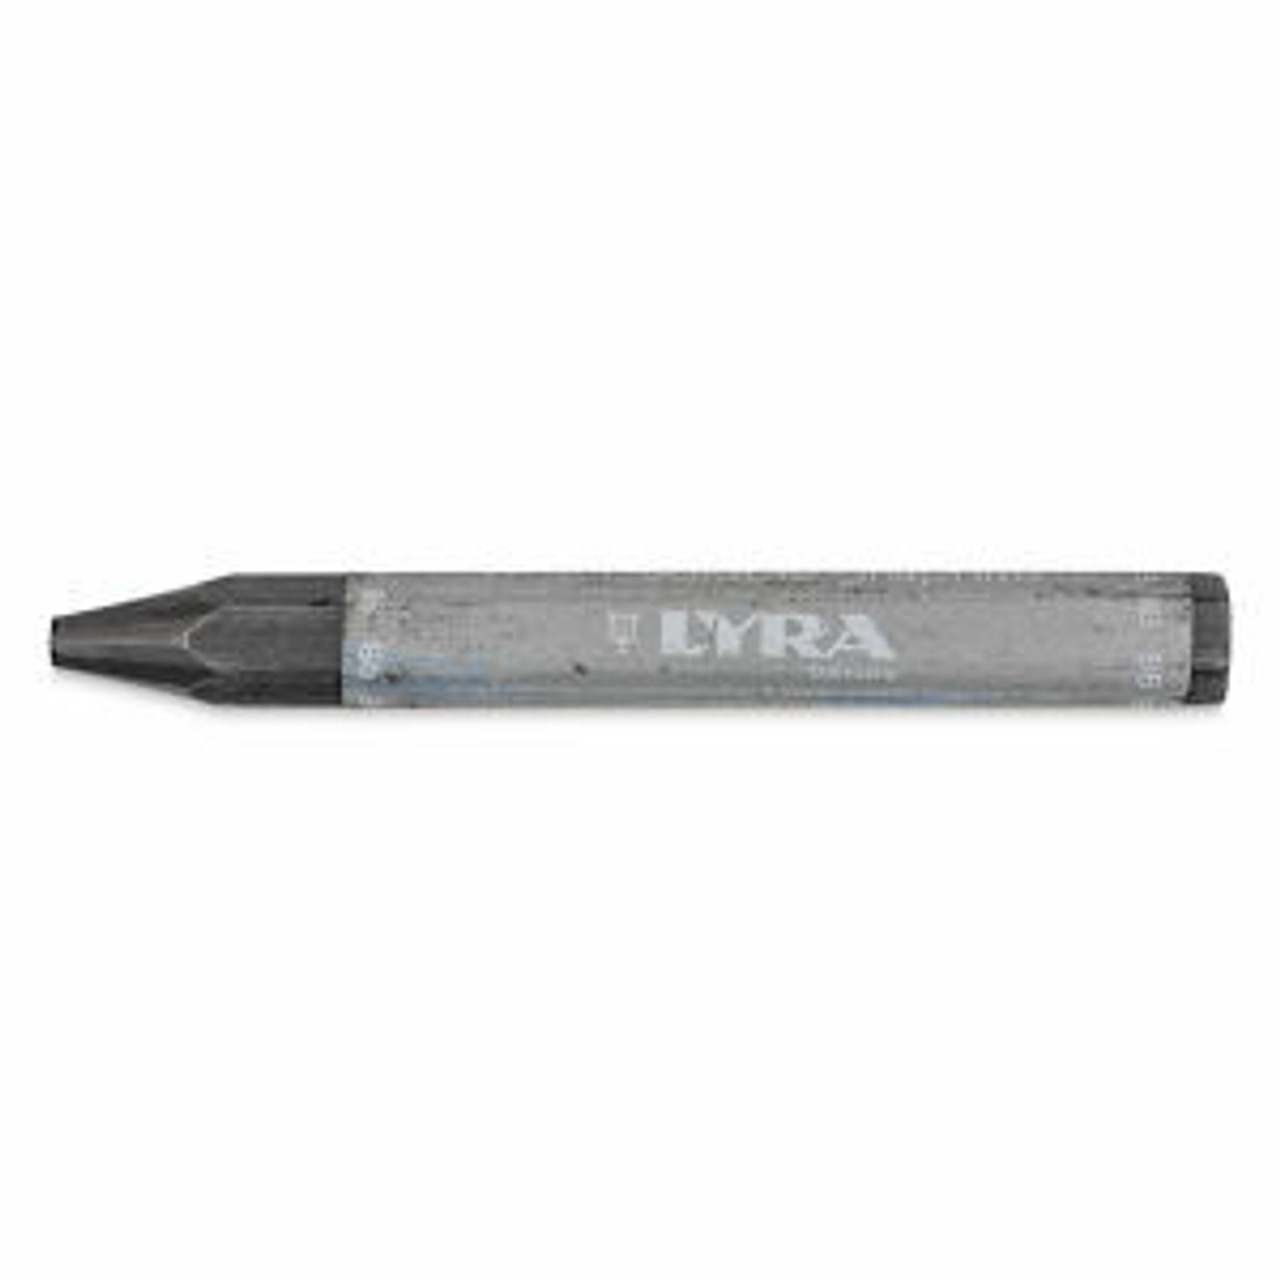 LYRA Assorted Degree Graphite Stick Set - Water Soluble and Non Soluble -  2B 6B 9B, Art, Drawing Supplies for Sketch & Shading Pencils - 3 Crayon